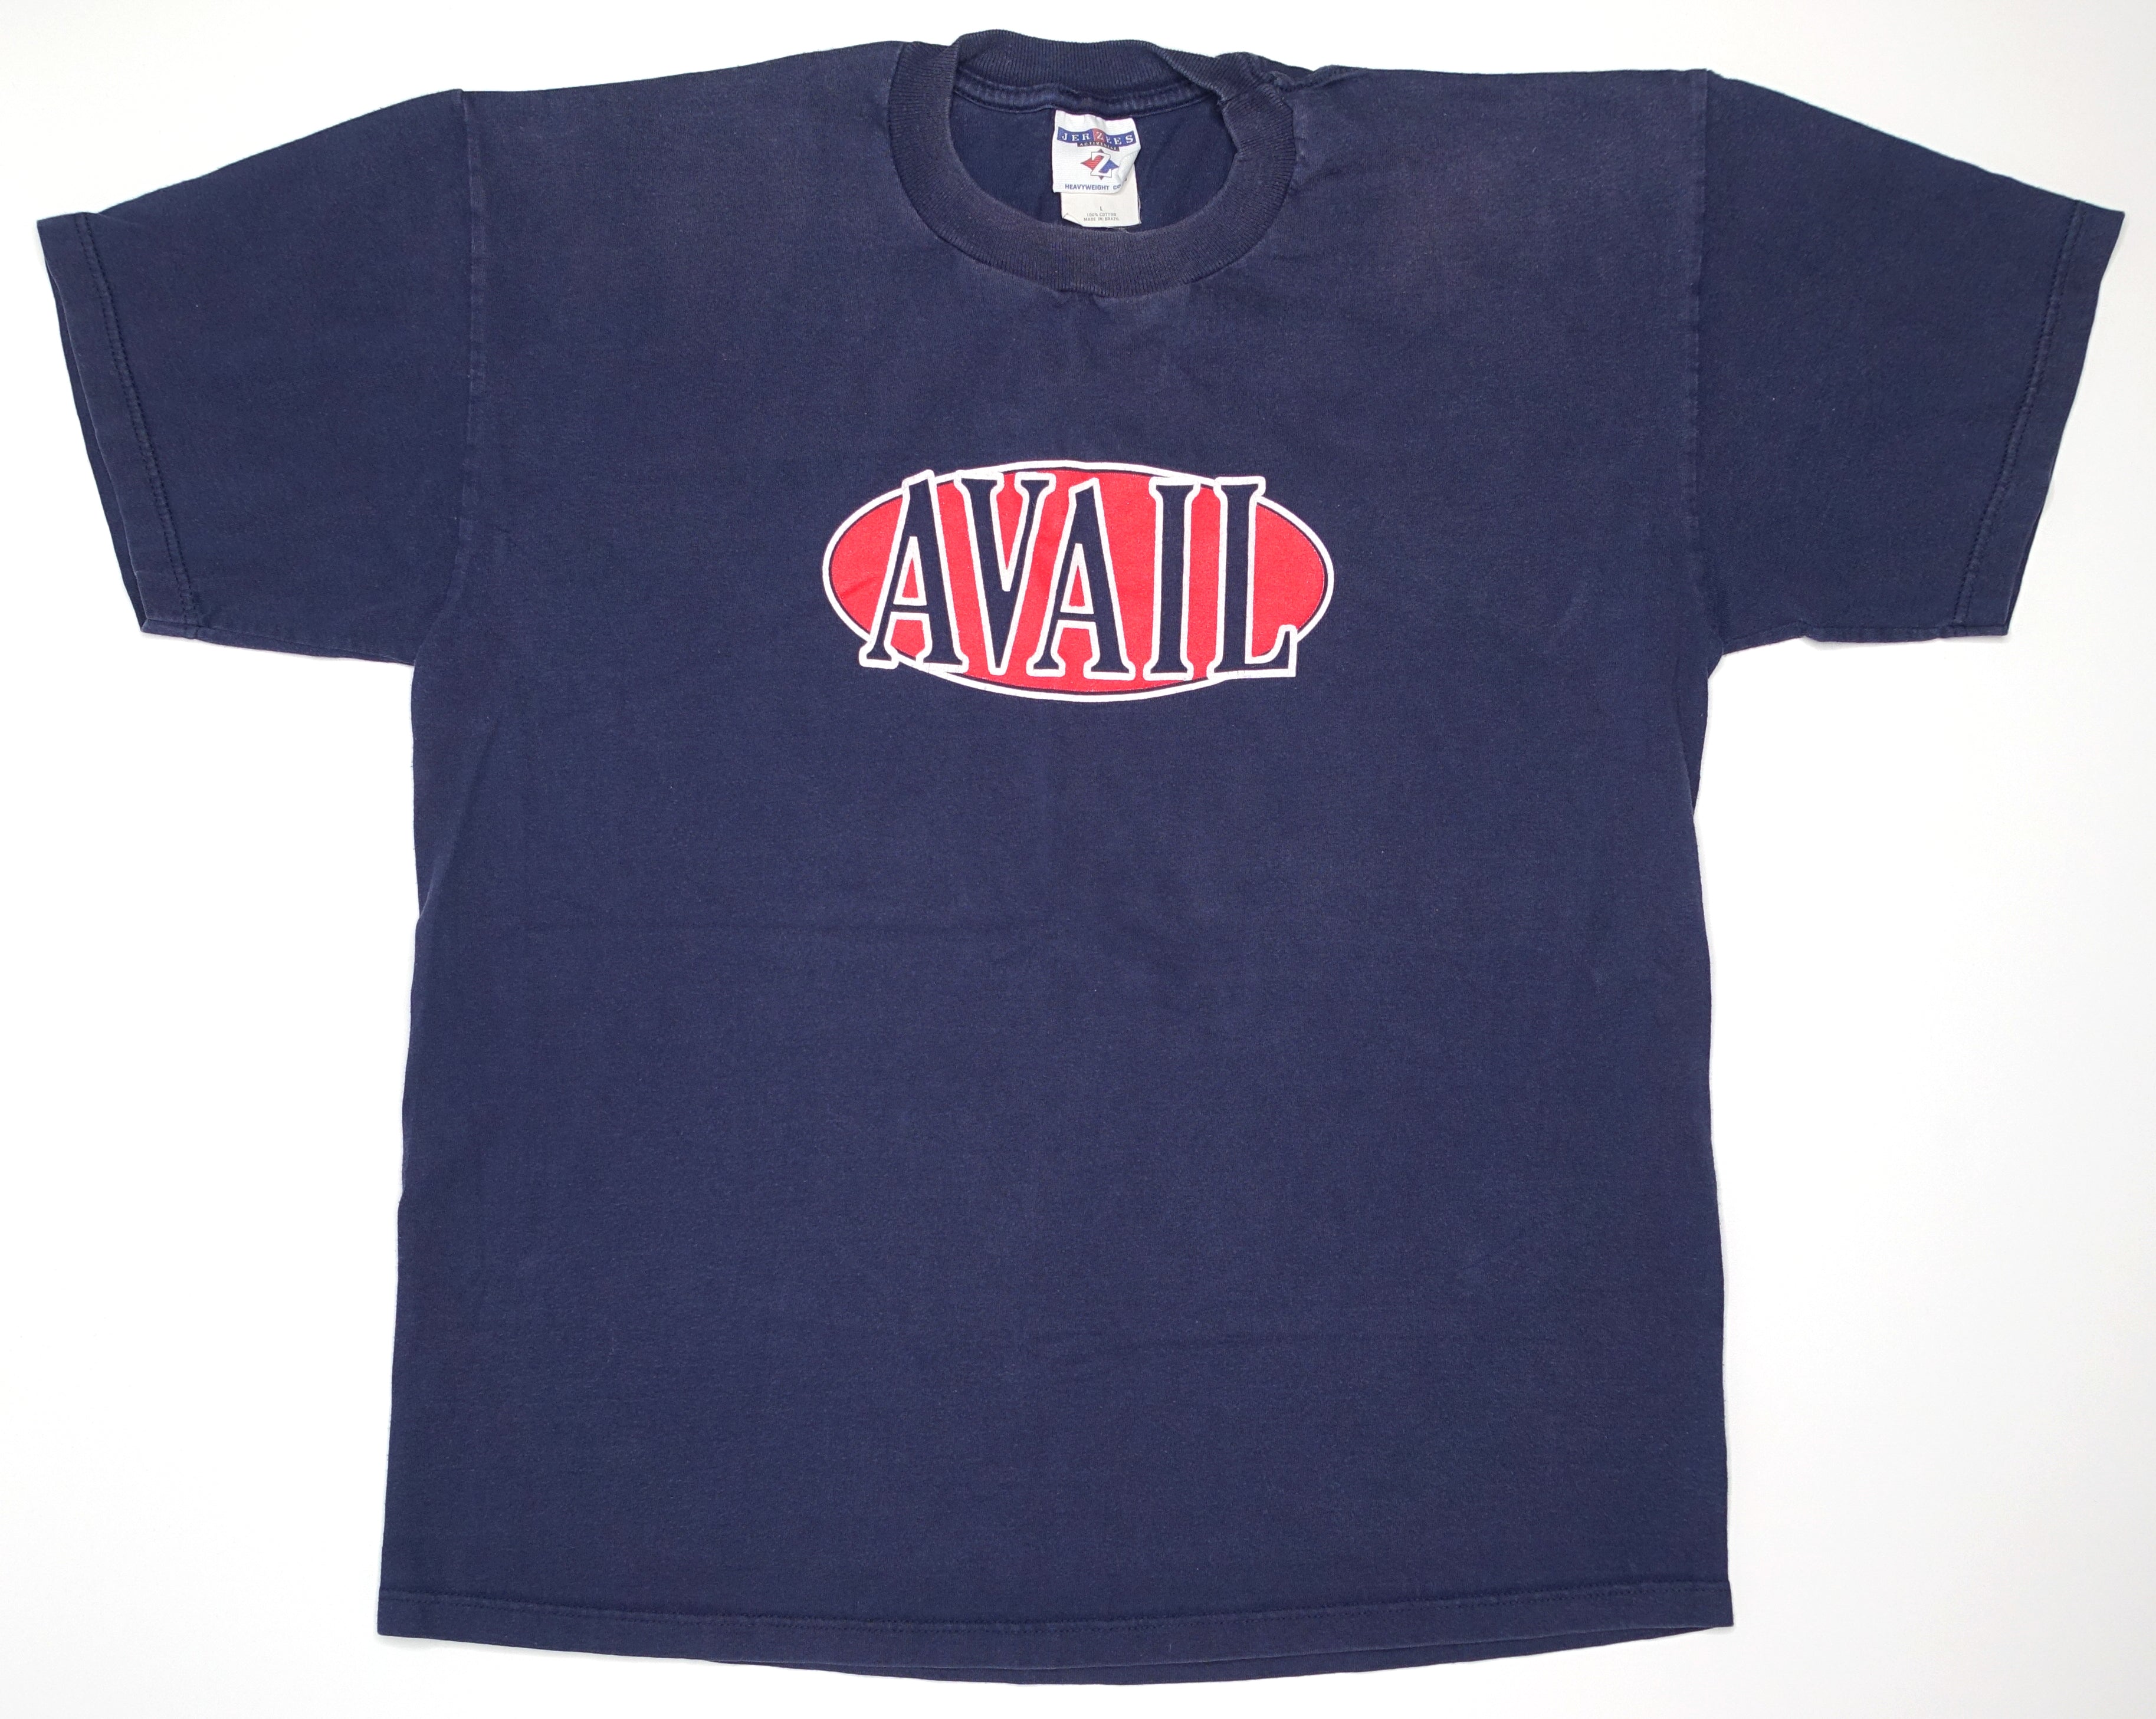 Avail - Oval Logo 90's Tour Shirt Size Large